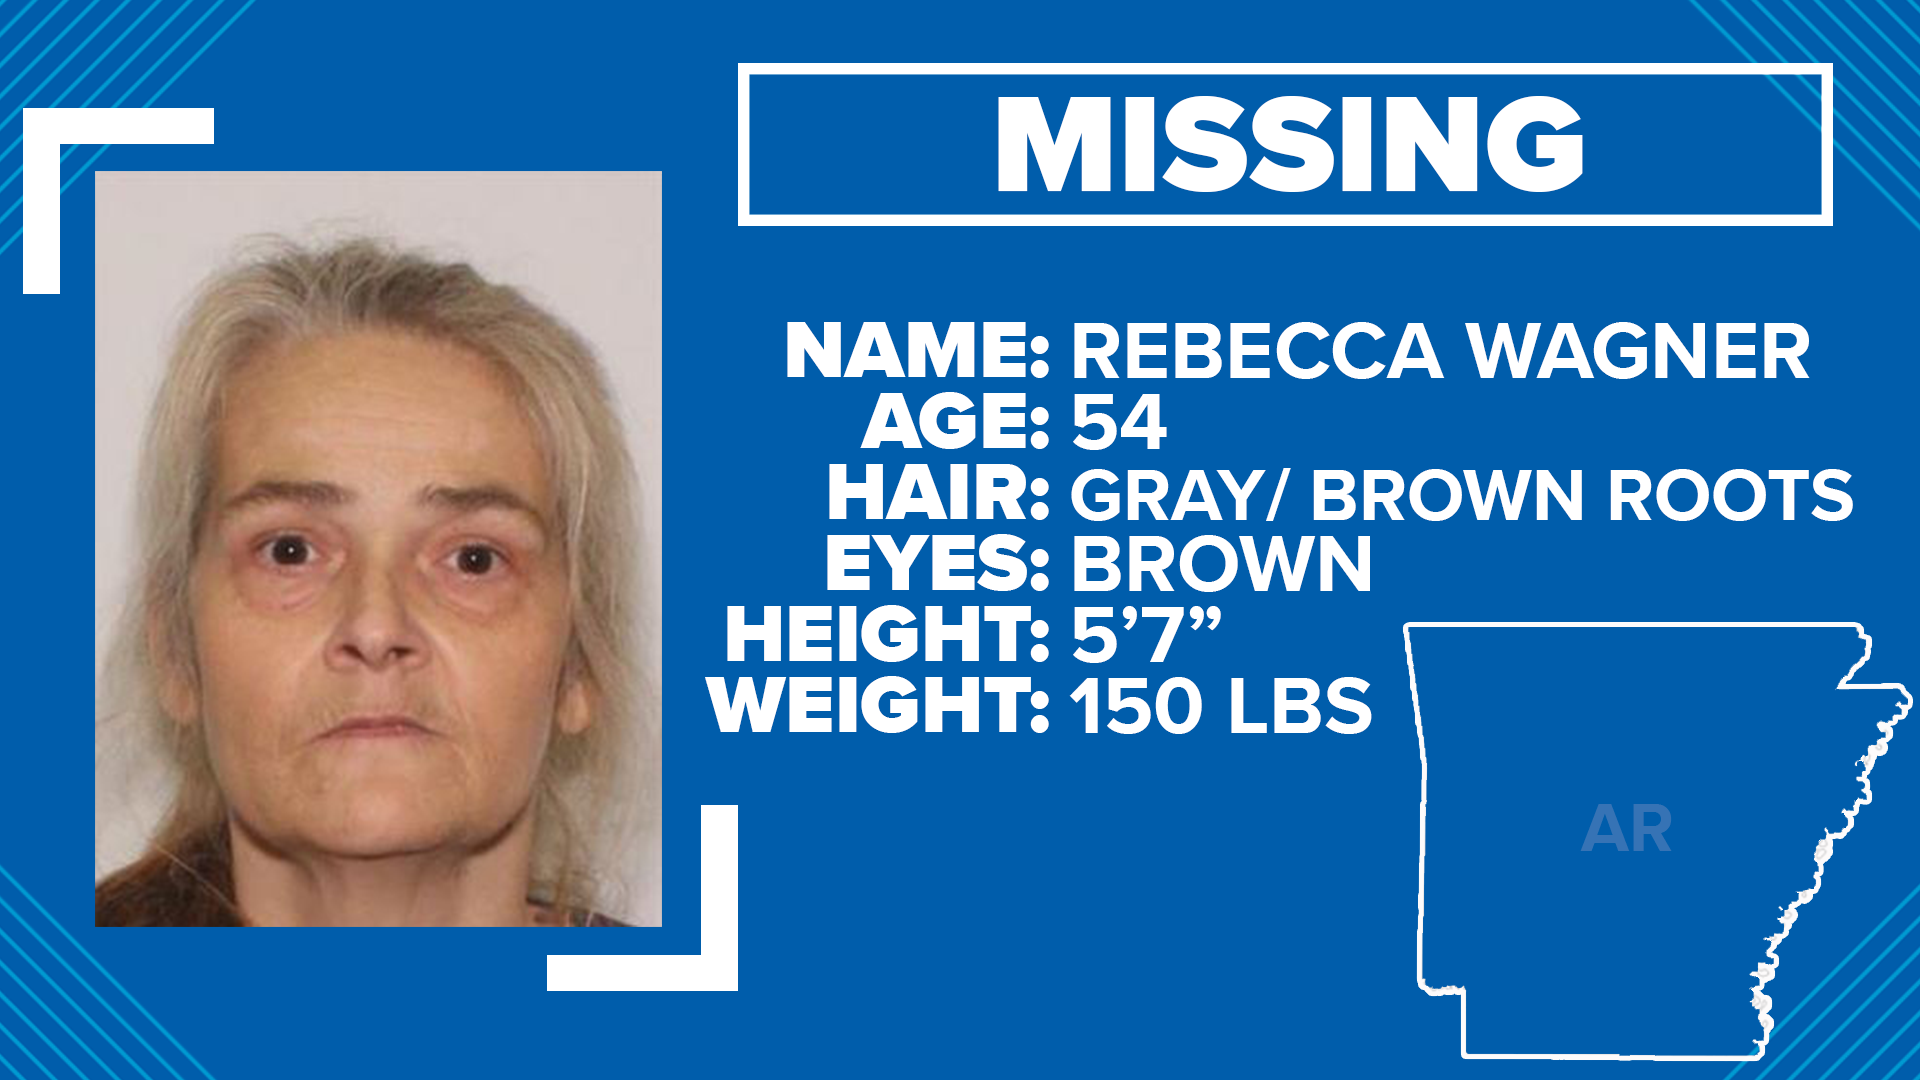 Garland County deputies are searching for a missing 54-year-old woman.